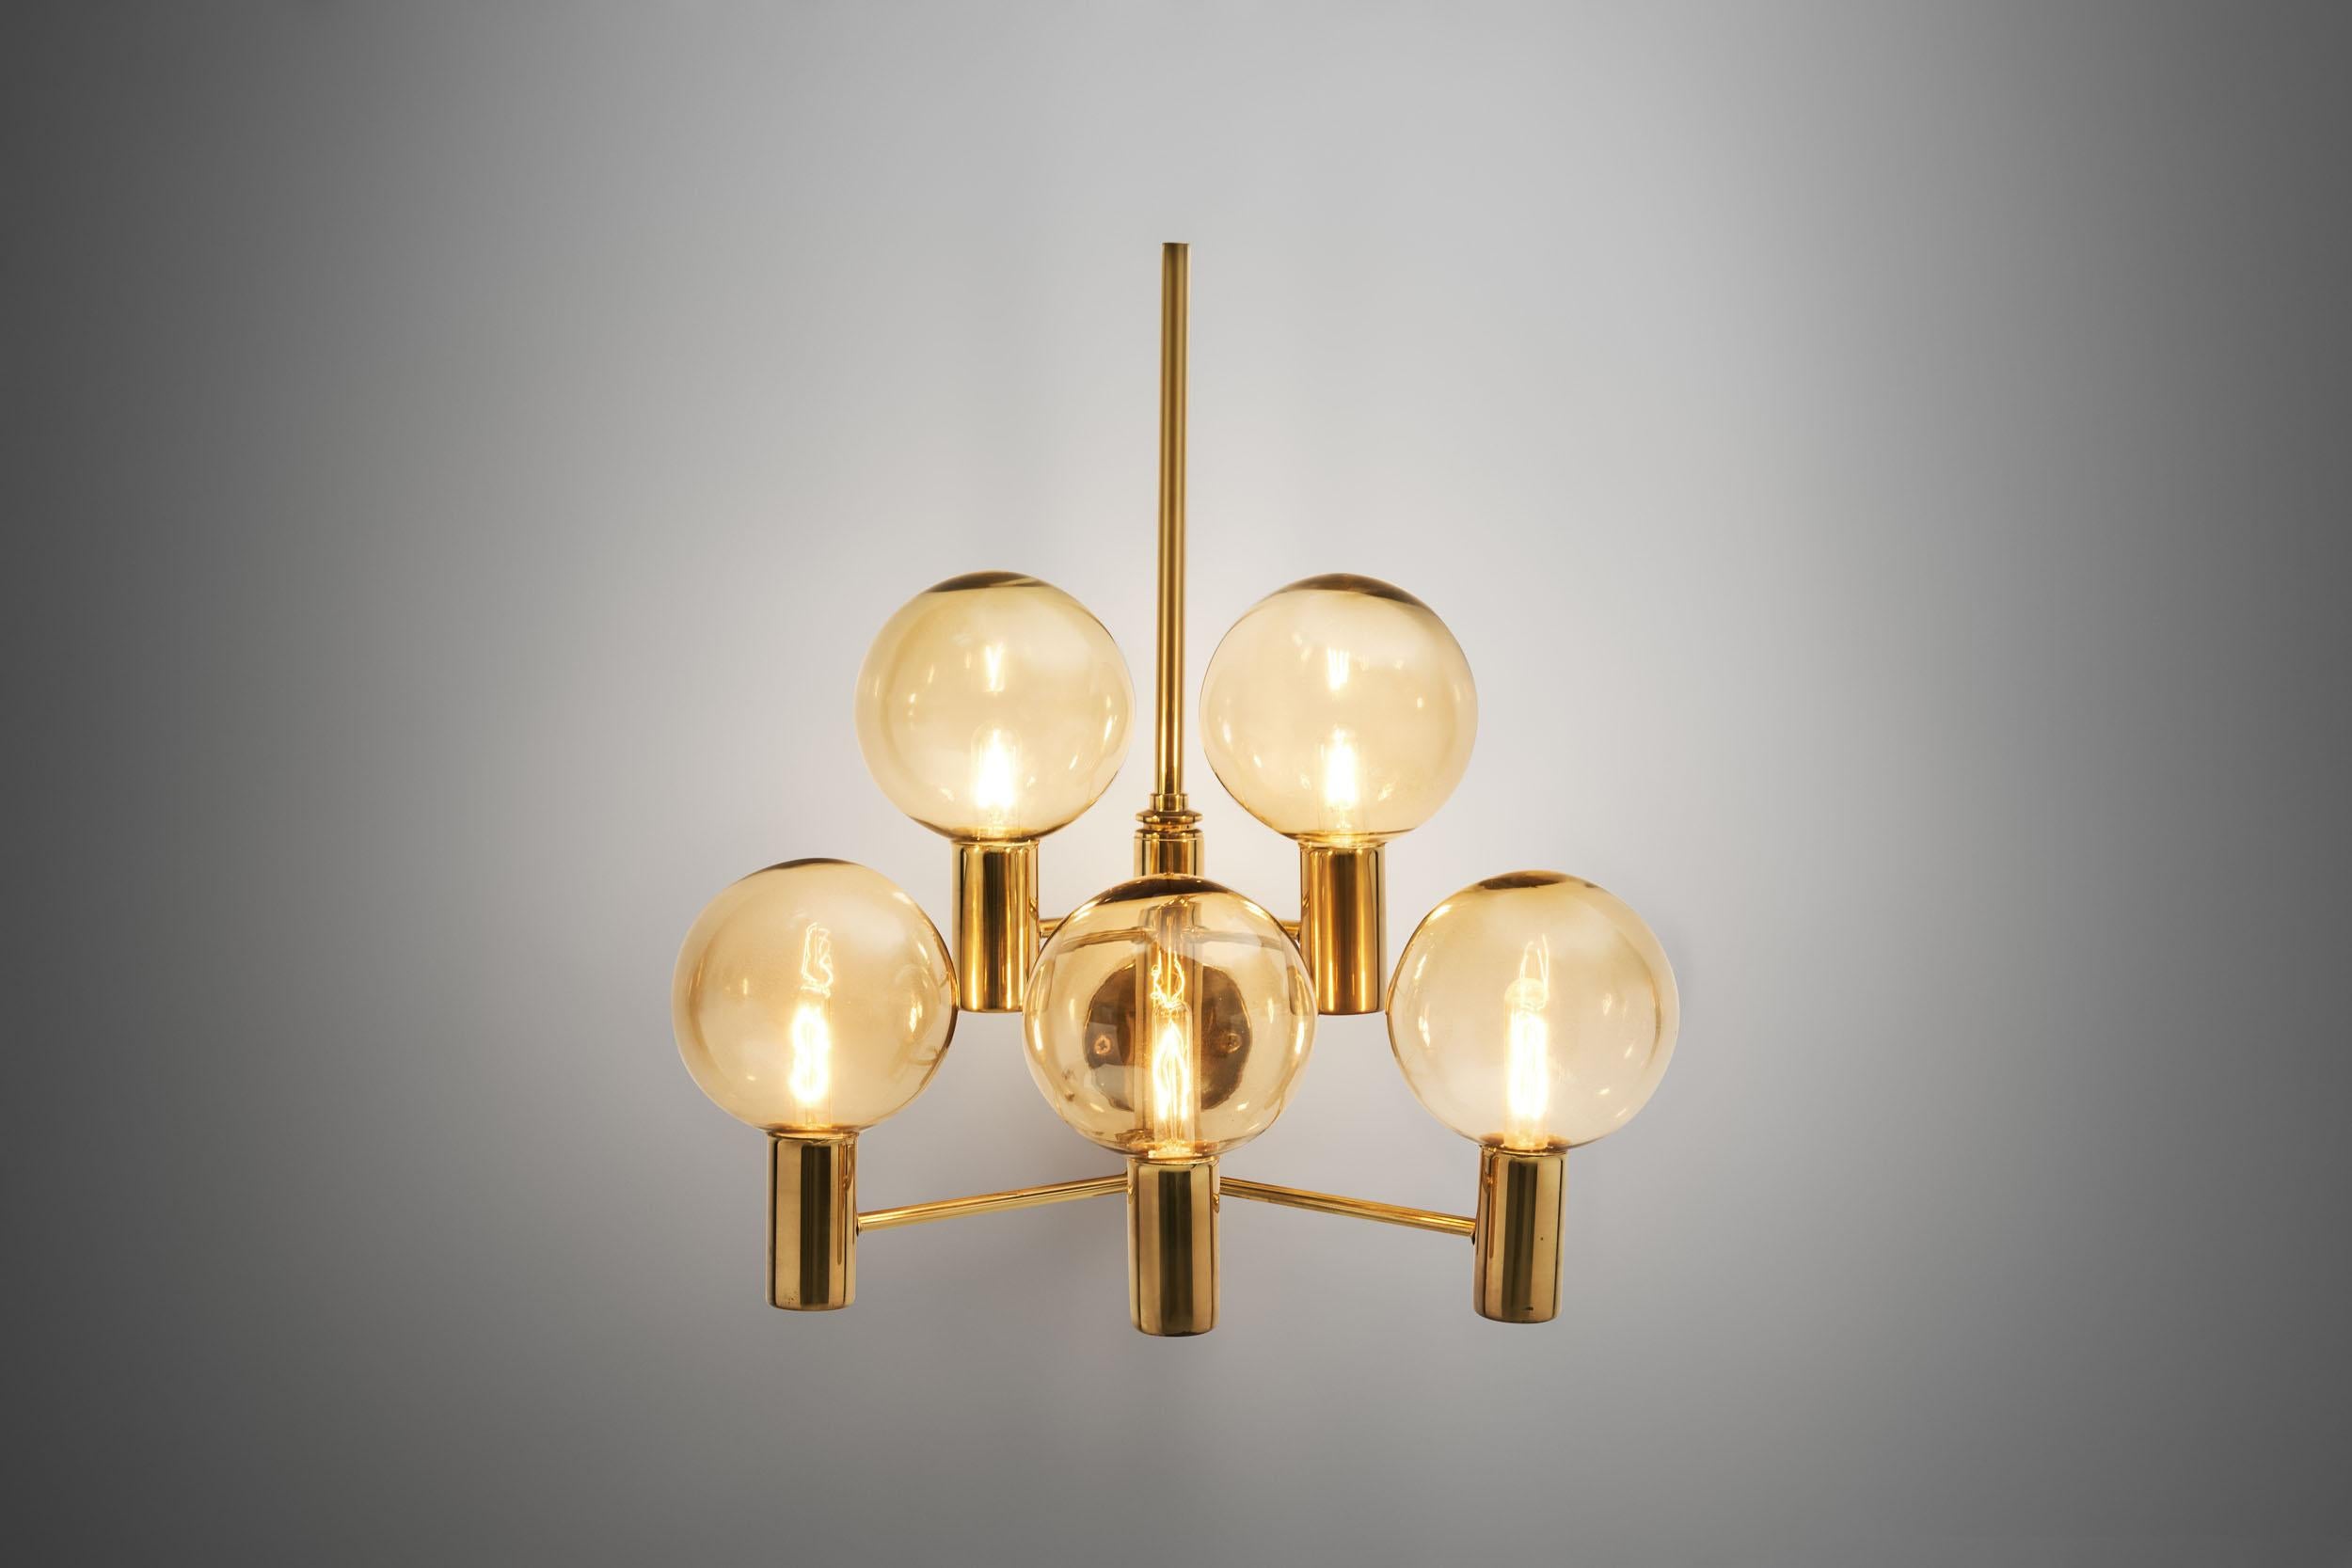 This wall lamp is perhaps the most stunning model of Jakobsson’s. With a brass frame holding five smoked, translucent glass shades, this lamp is the upgraded, larger version of the model V 149/3. The design clearly shows the Swedish designer’s